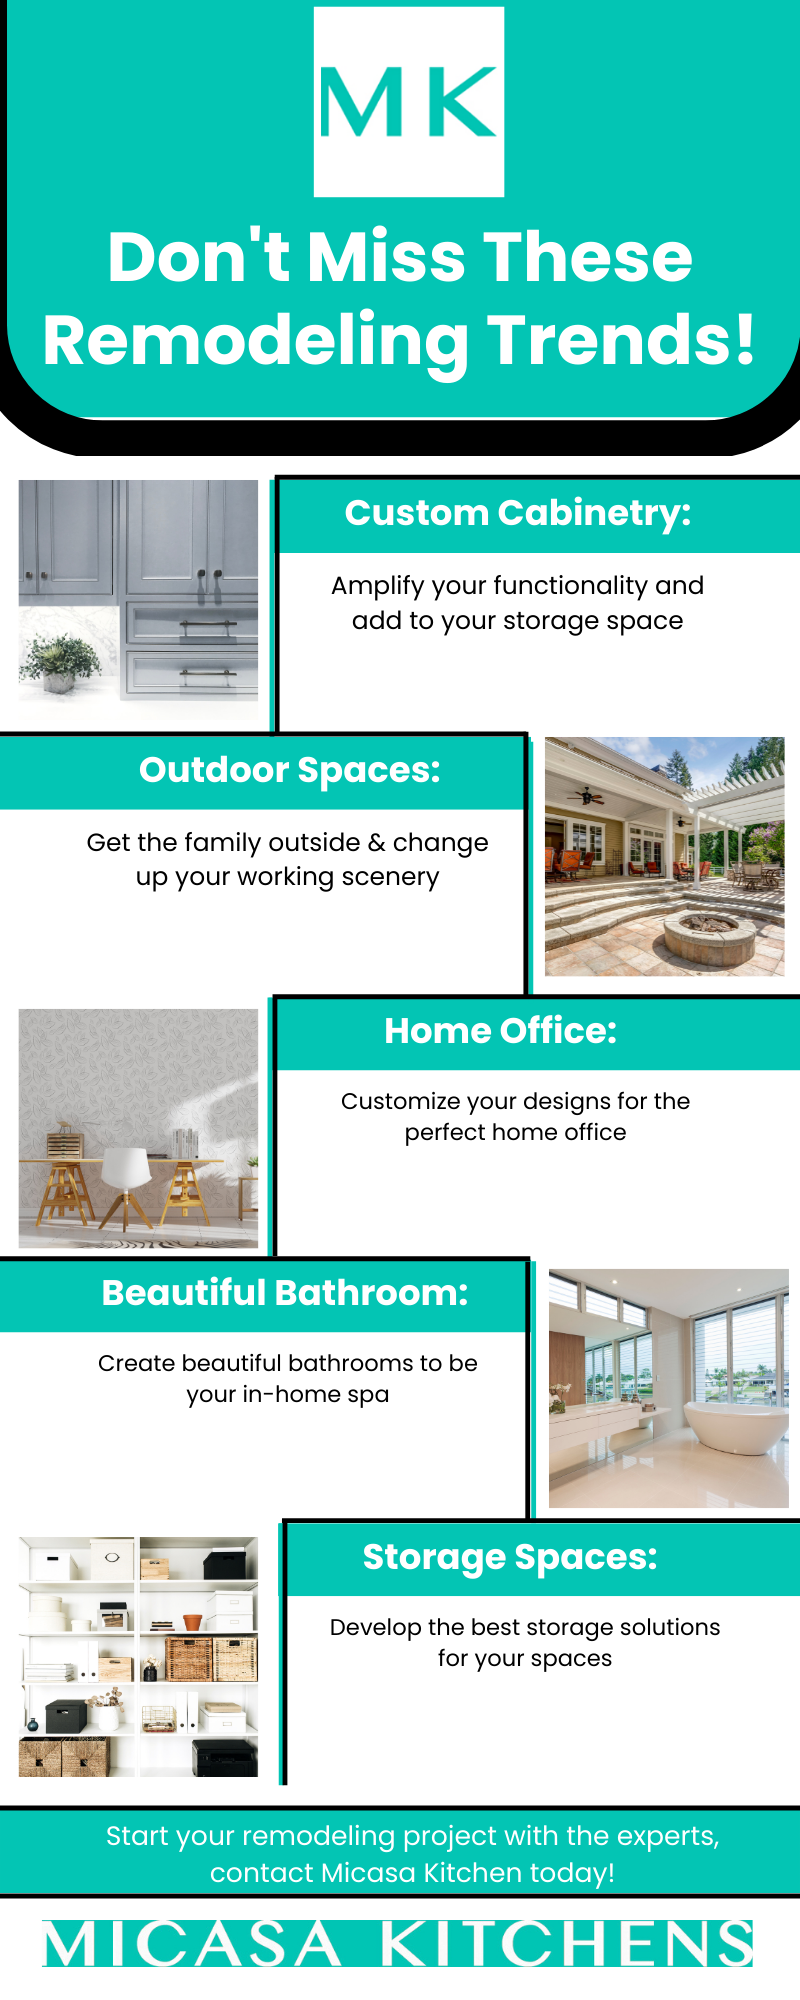 C1138 - 10 Remodeling Trends for 2022 You Won't Want to Ignore.png